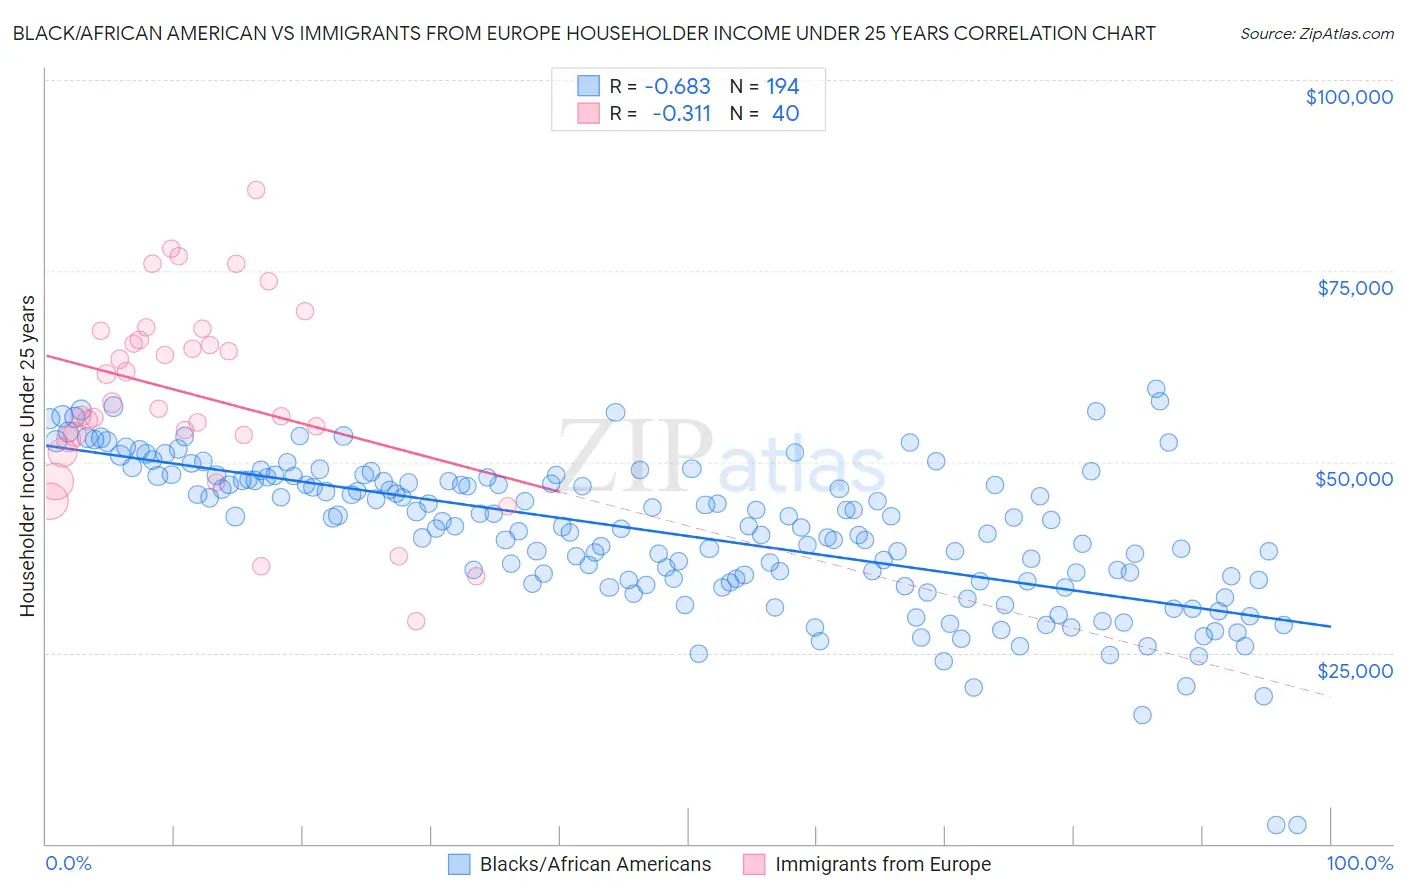 Black/African American vs Immigrants from Europe Householder Income Under 25 years